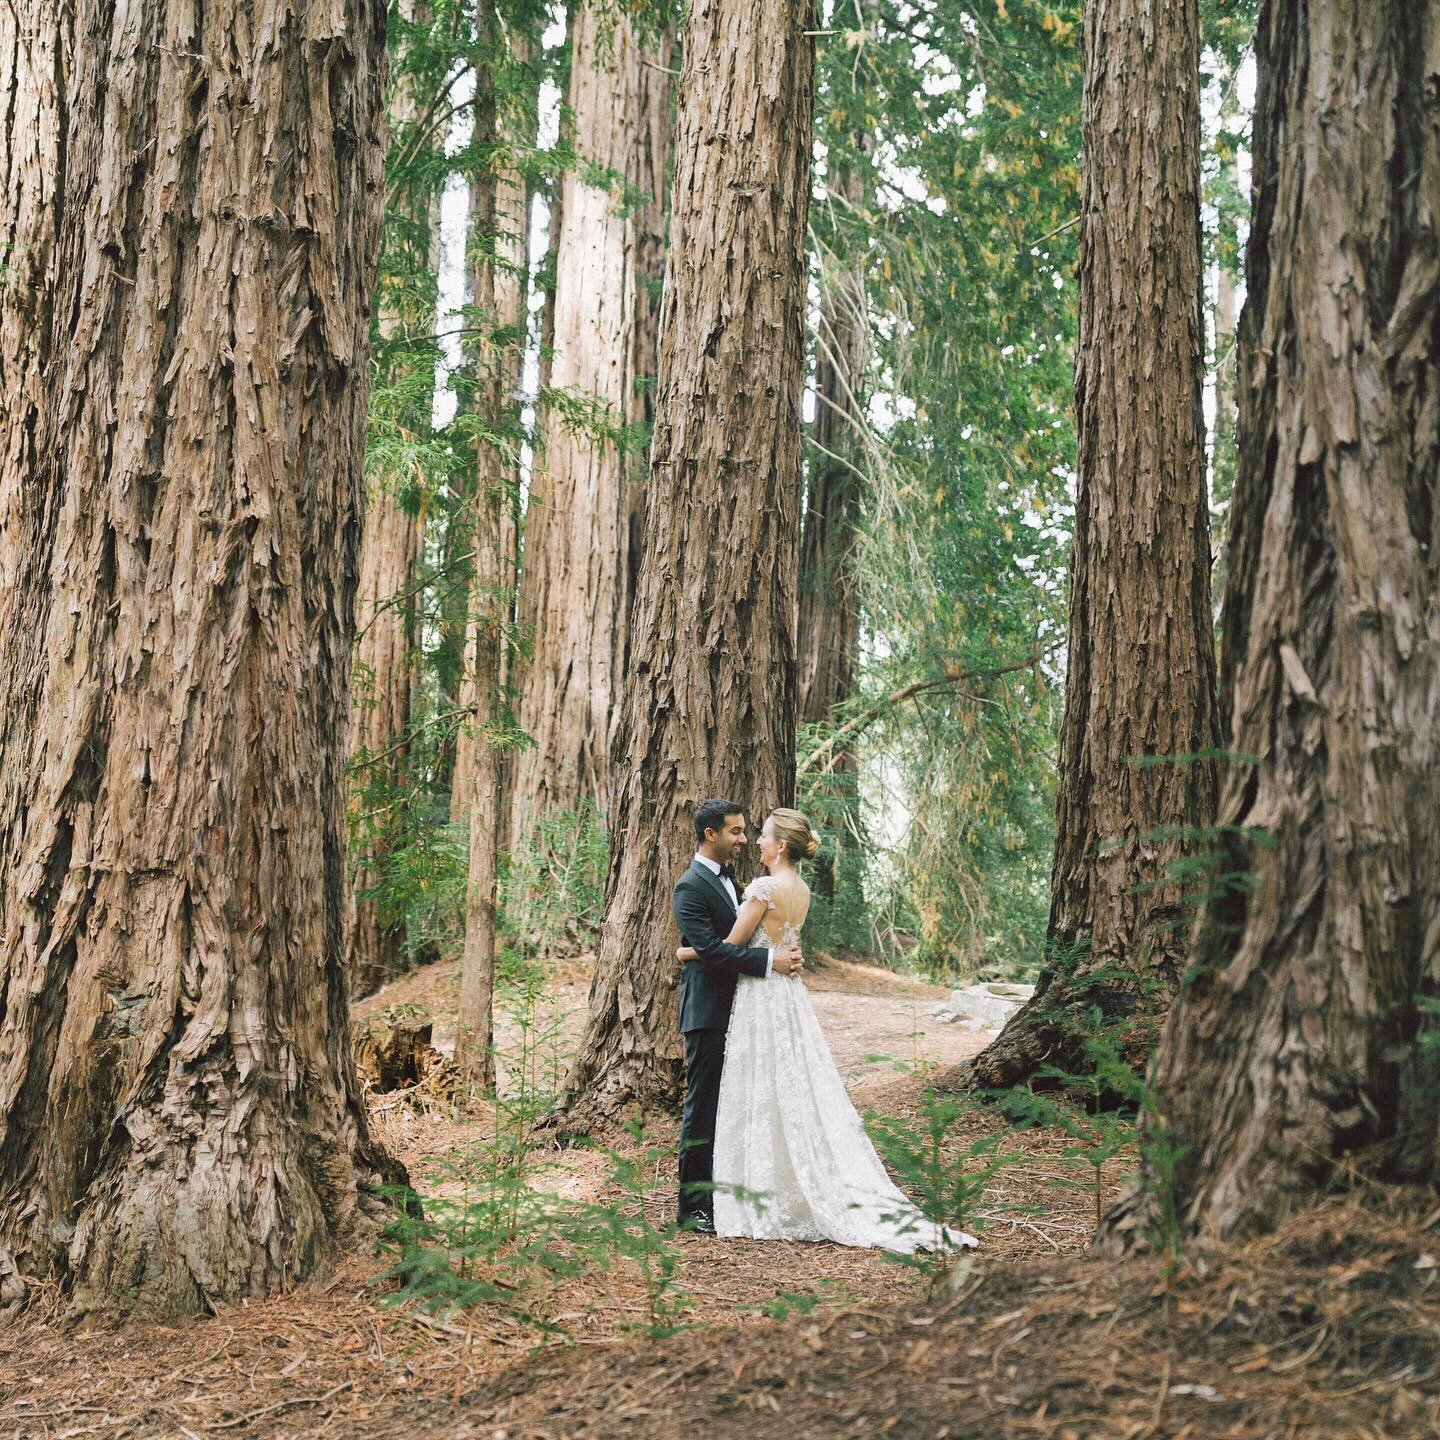 The most epic backdrop for any wedding. This couple loved the natural beauty of the Redwoods and wanted say &ldquo;I do&rdquo; surrounded by Mother Earth. Swipe to see nature at its best.

Photographer | @kelseaholderphoto 

#wedding #weddinginspo #w